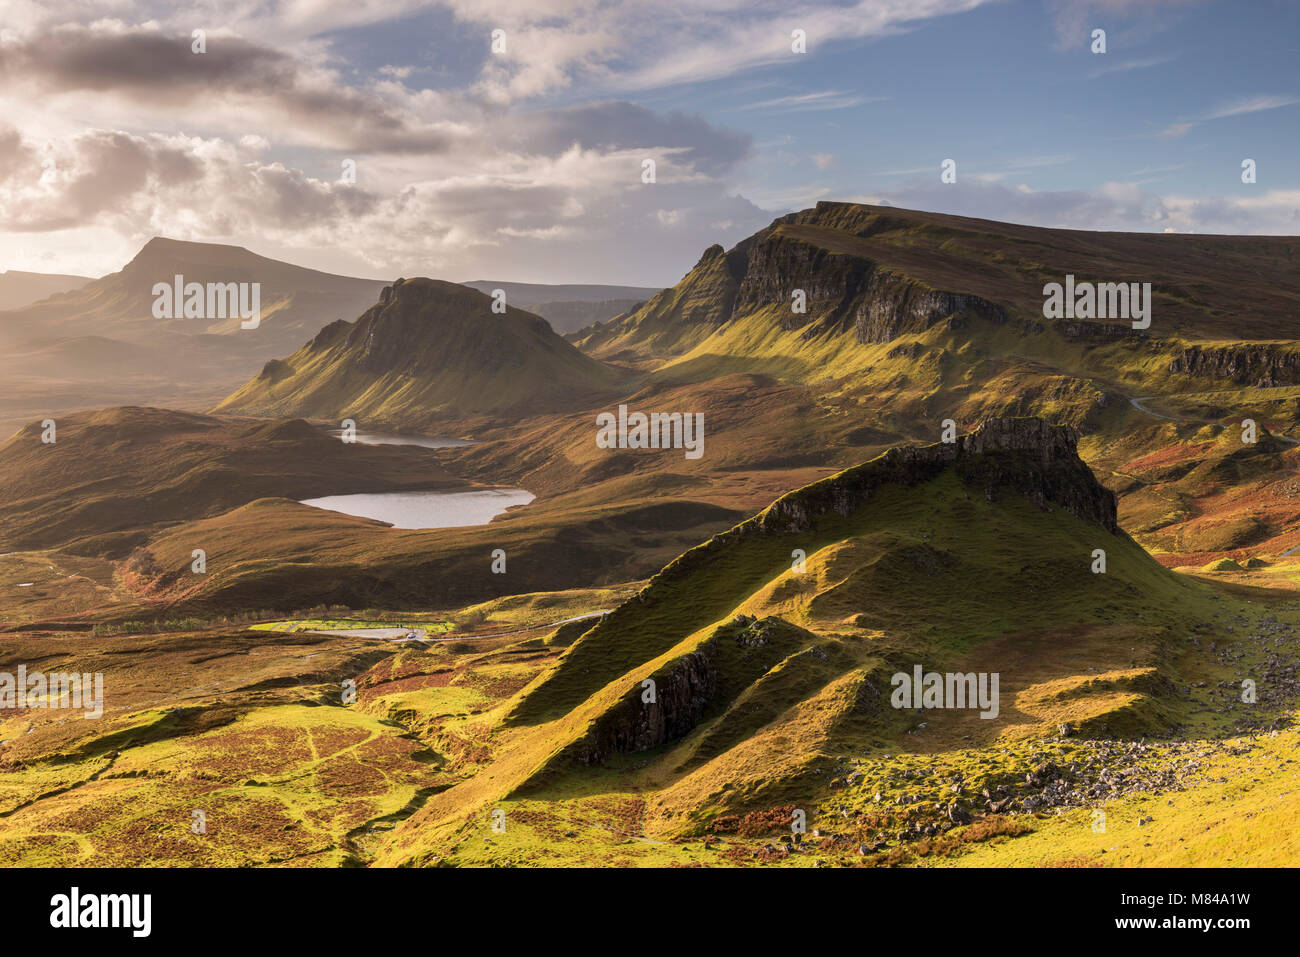 Morning sunlight on the Trotternish Mountains from the Quiraing, Isle of Skye, Scotland. Autumn (November) 2017. Stock Photo